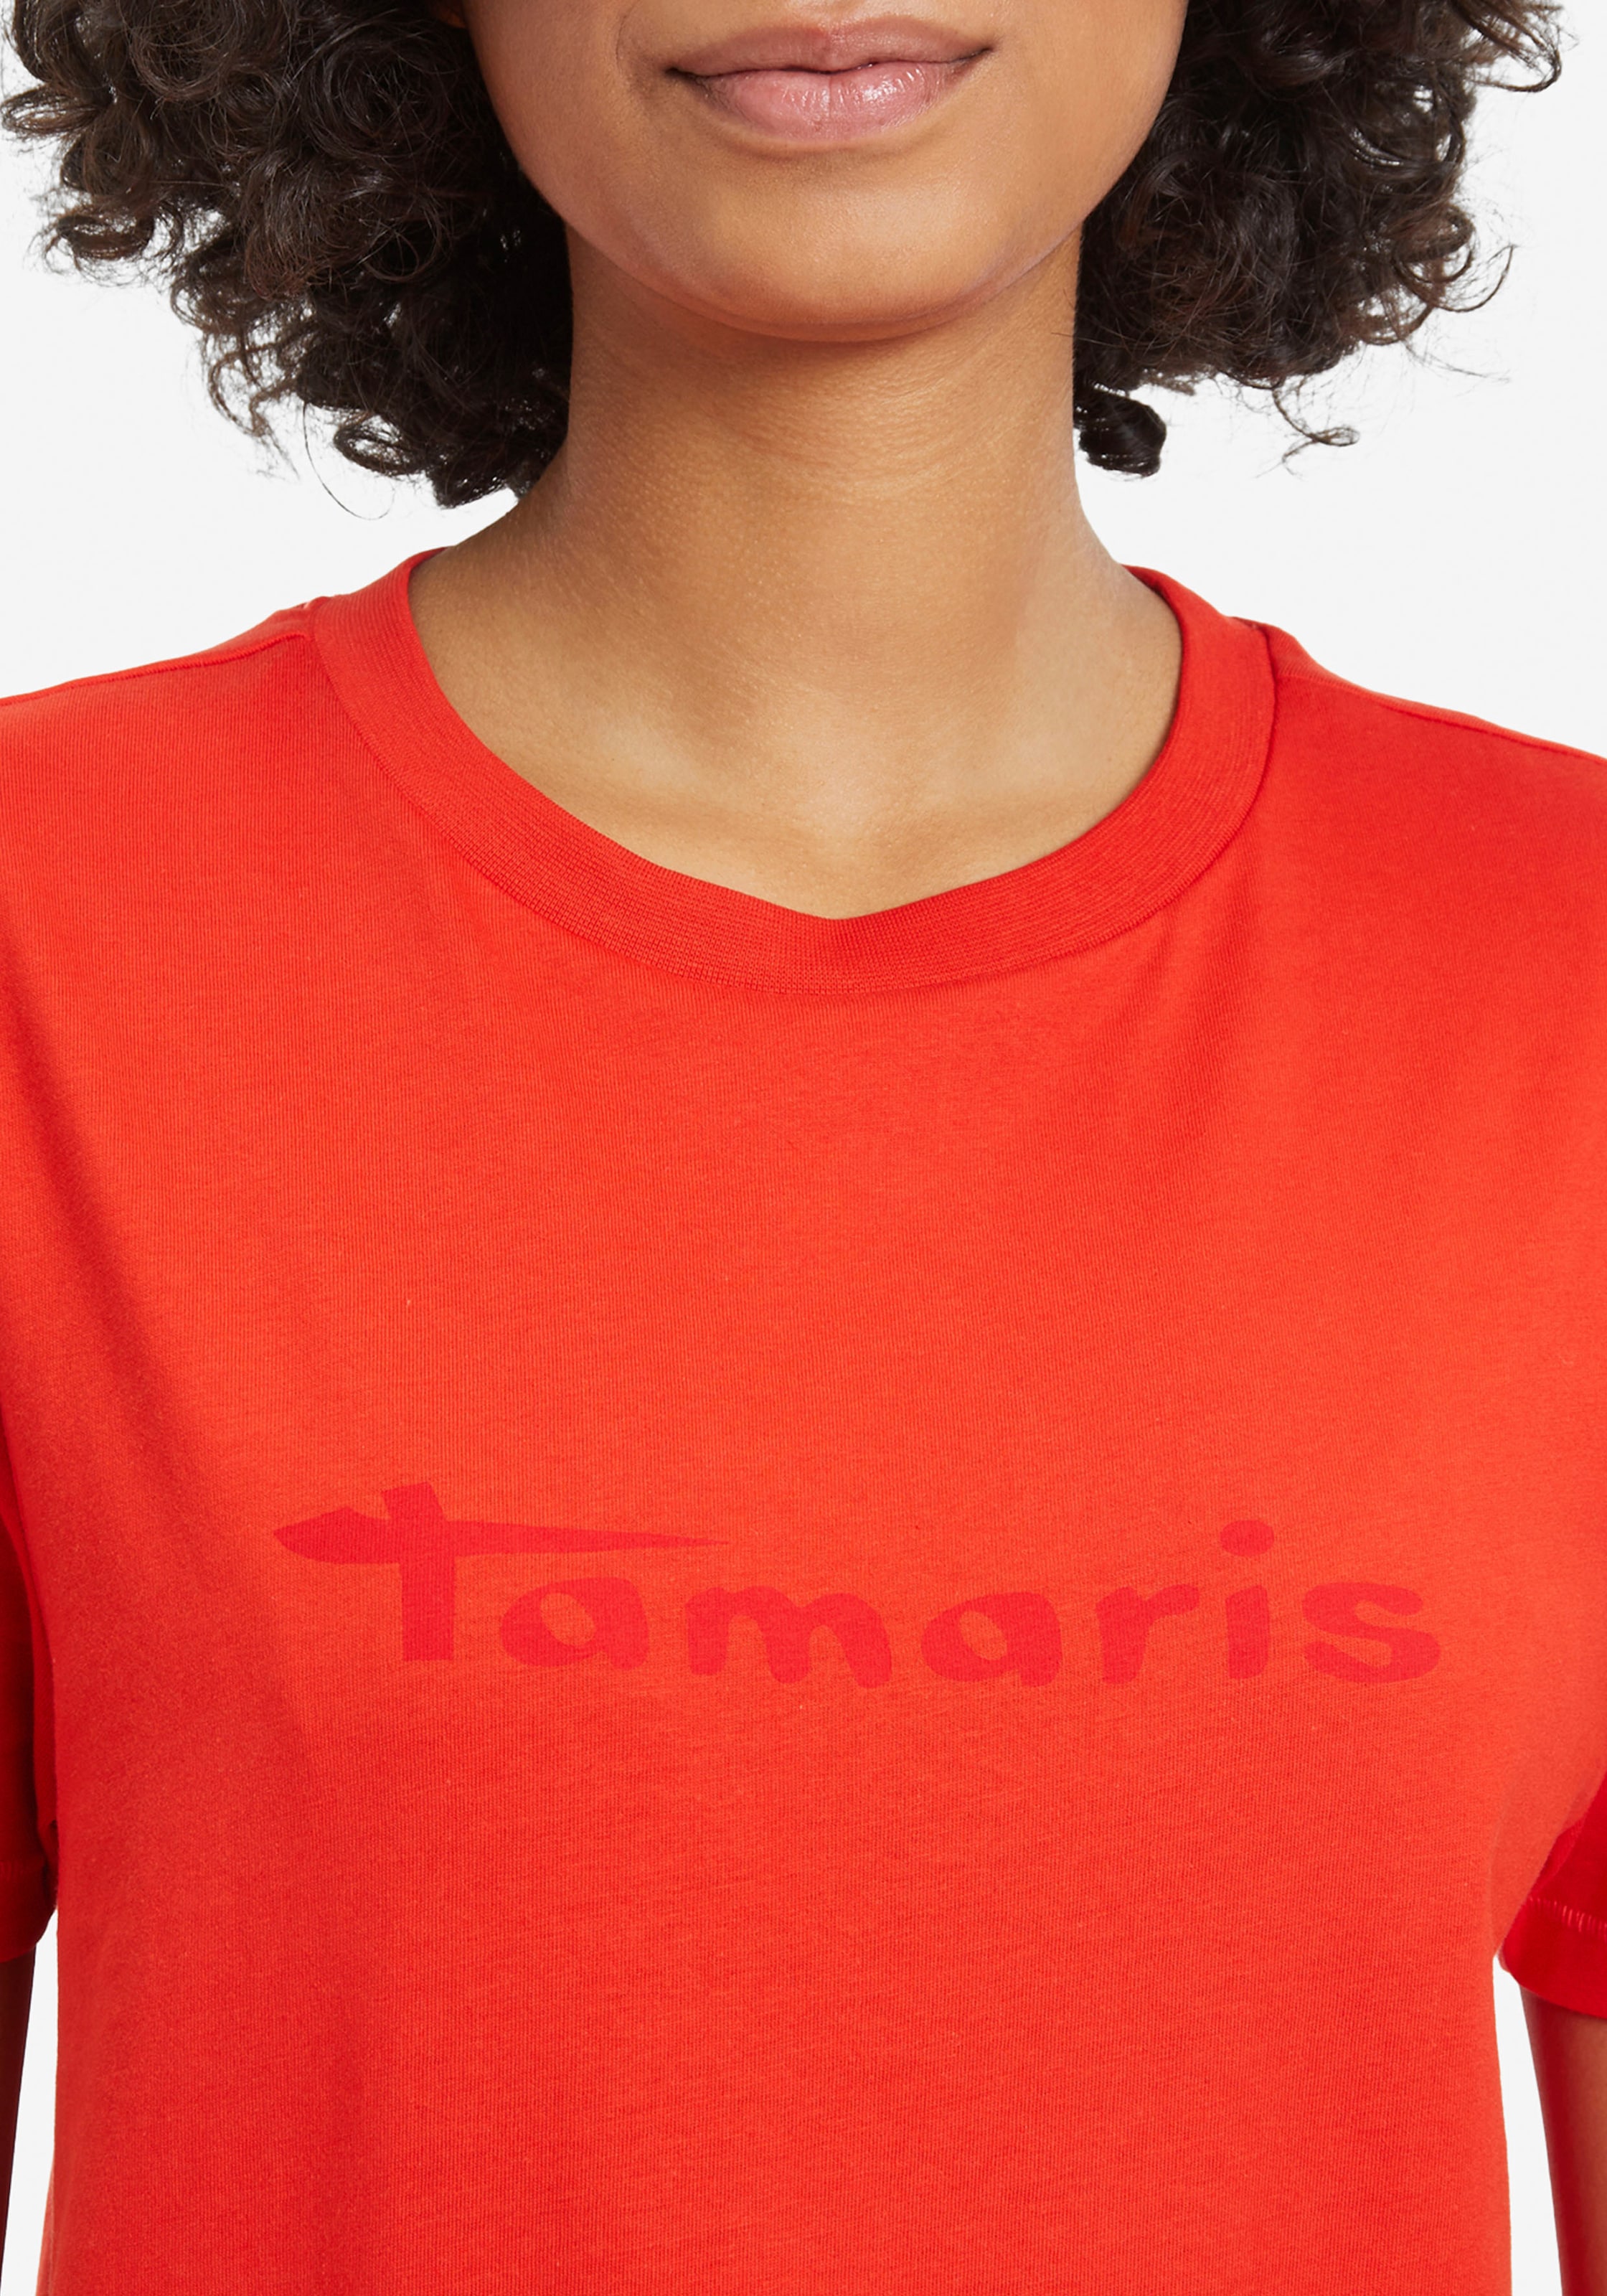 TAMARIS T-Shirt in Rot, Cranberry | ABOUT YOU